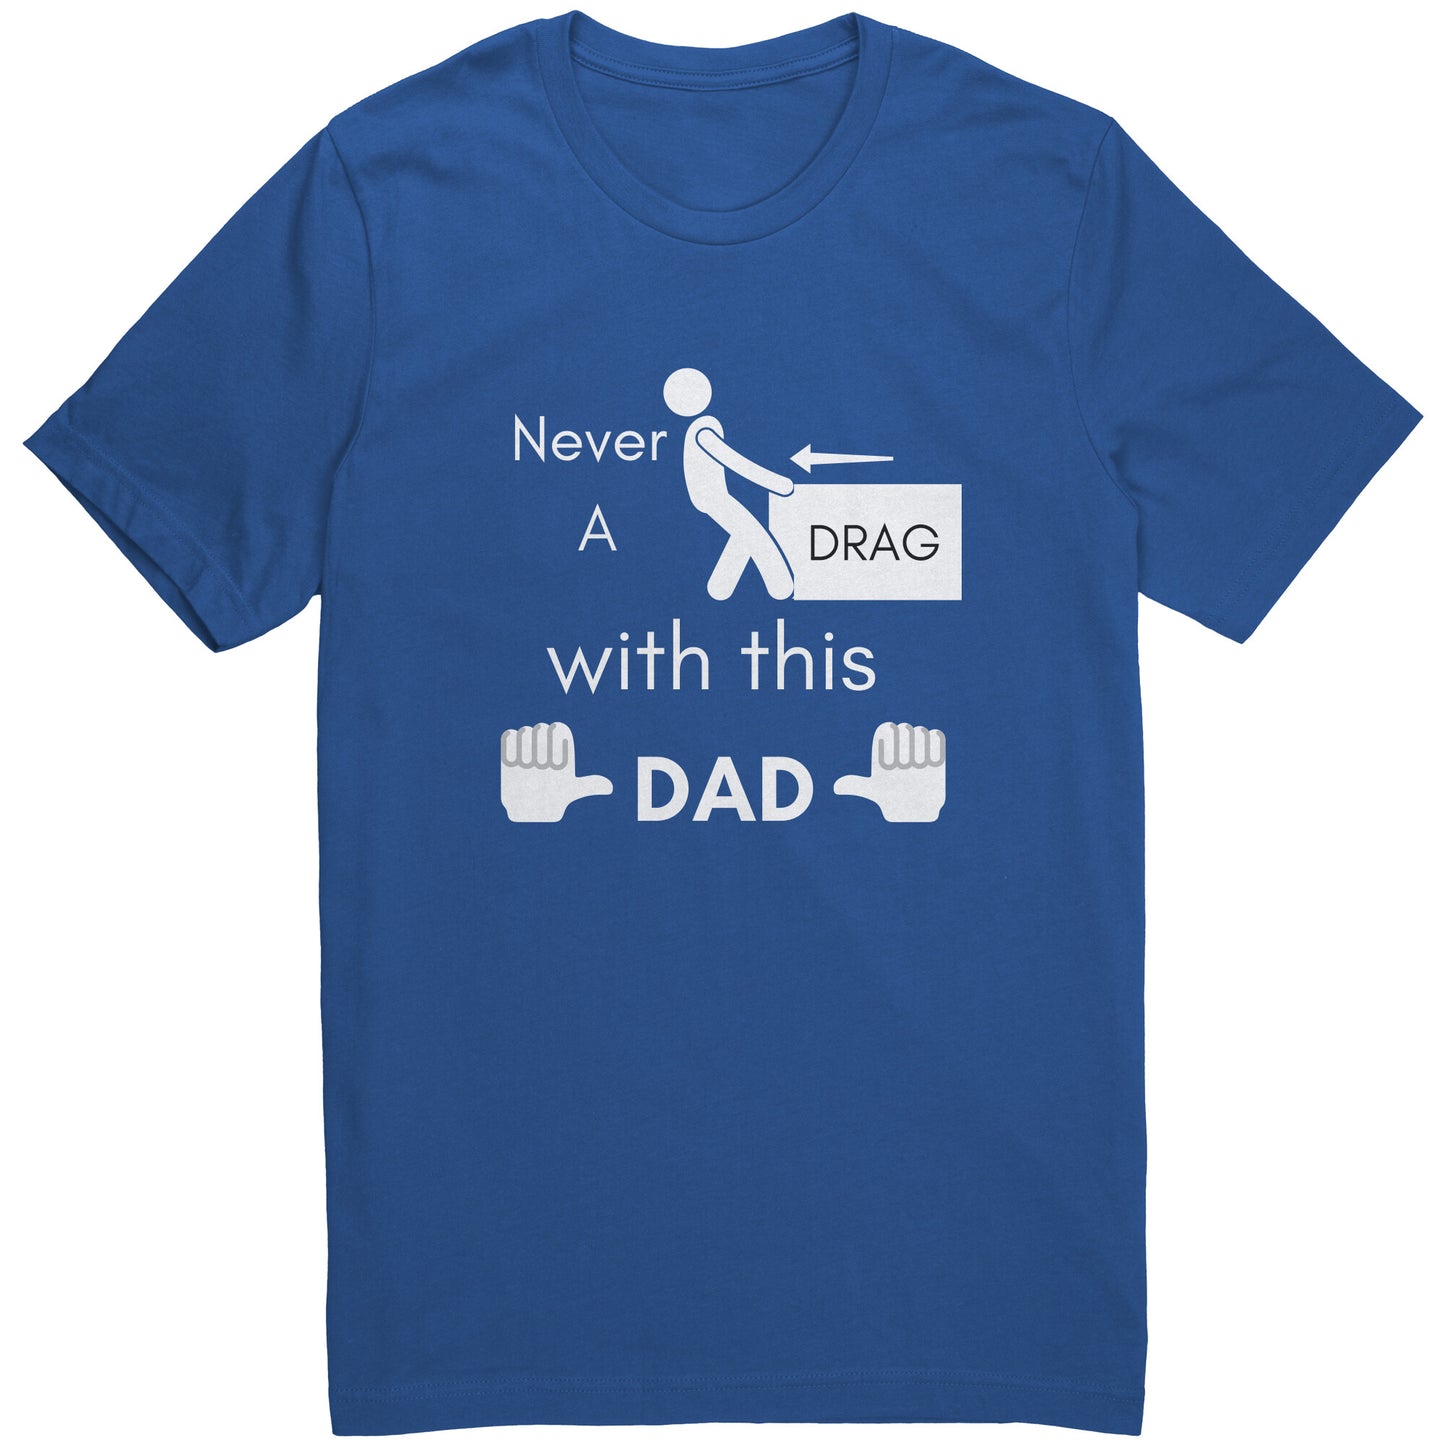 This Dad Adult Unisex T-shirt